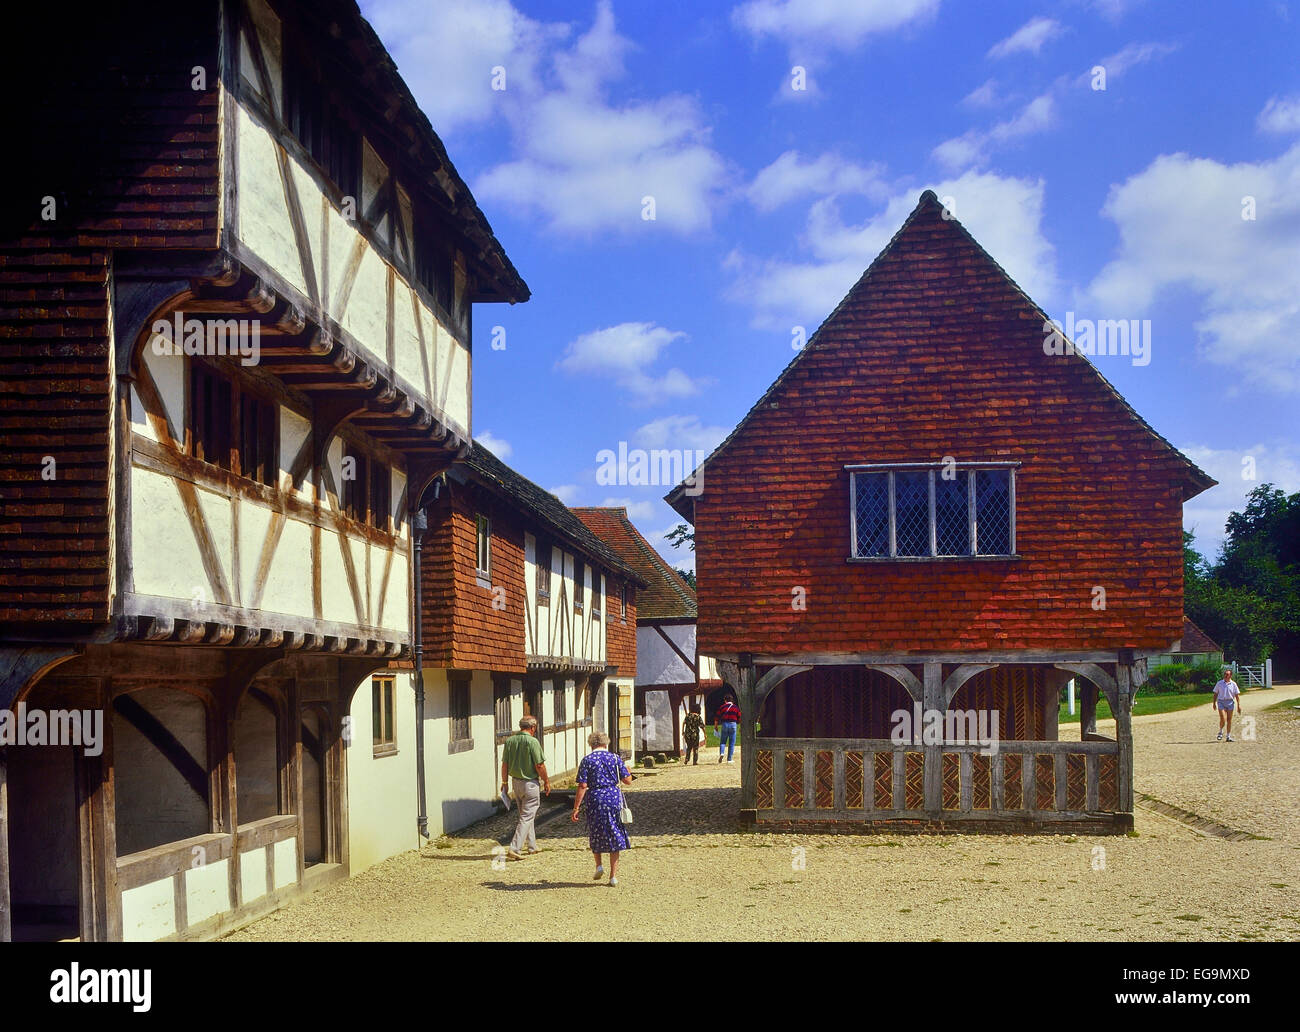 Weald and Downland museo vivente. West Sussex. In Inghilterra. Regno Unito Foto Stock